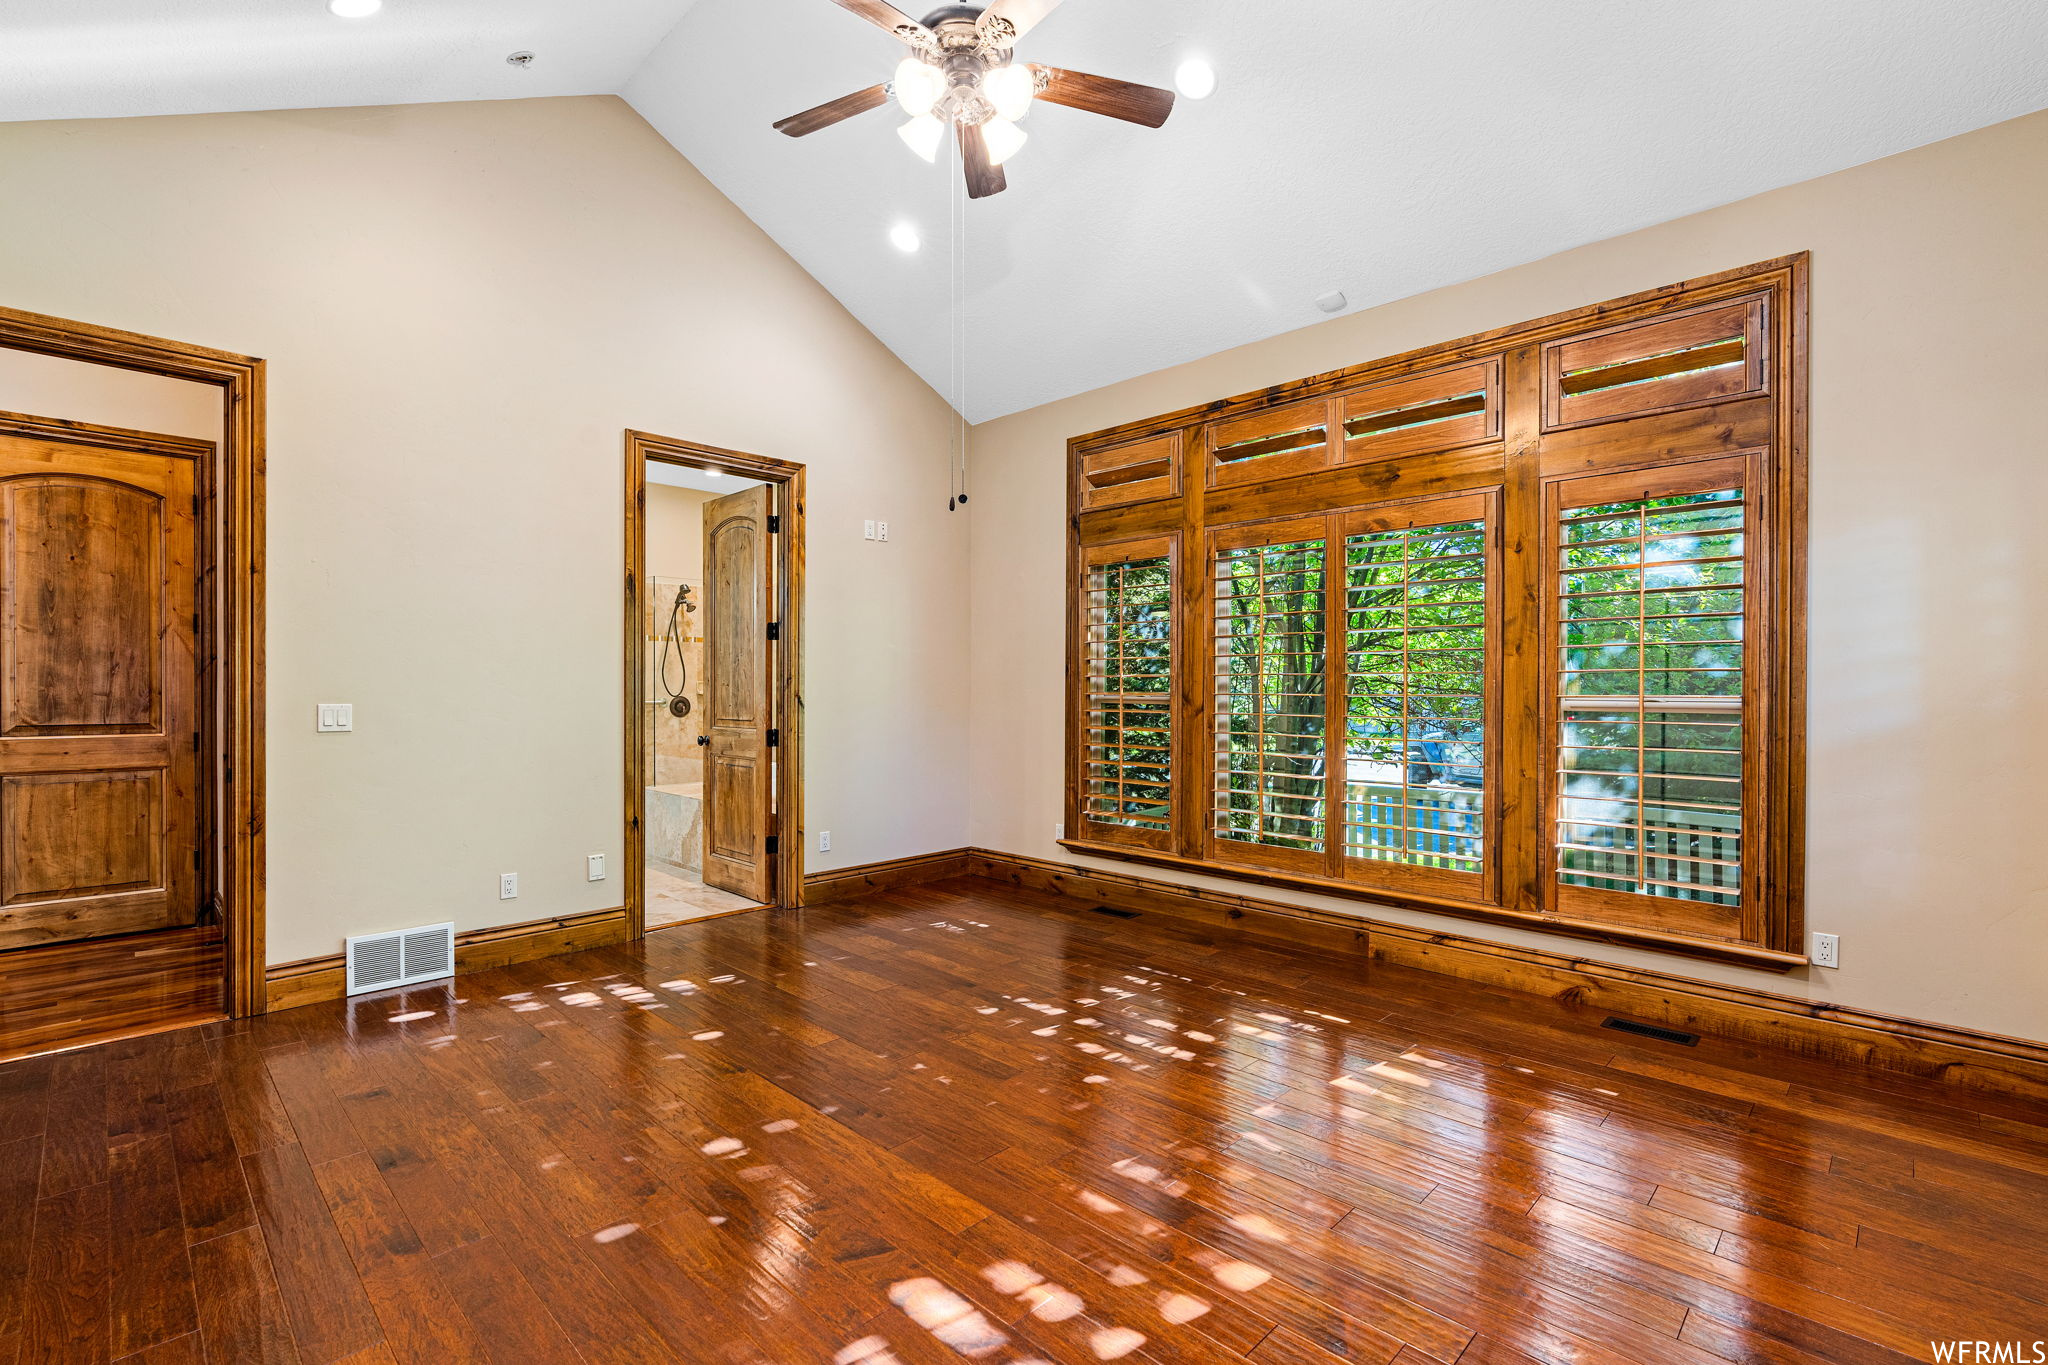 Hardwood floored spare room featuring vaulted ceiling high and ceiling fan